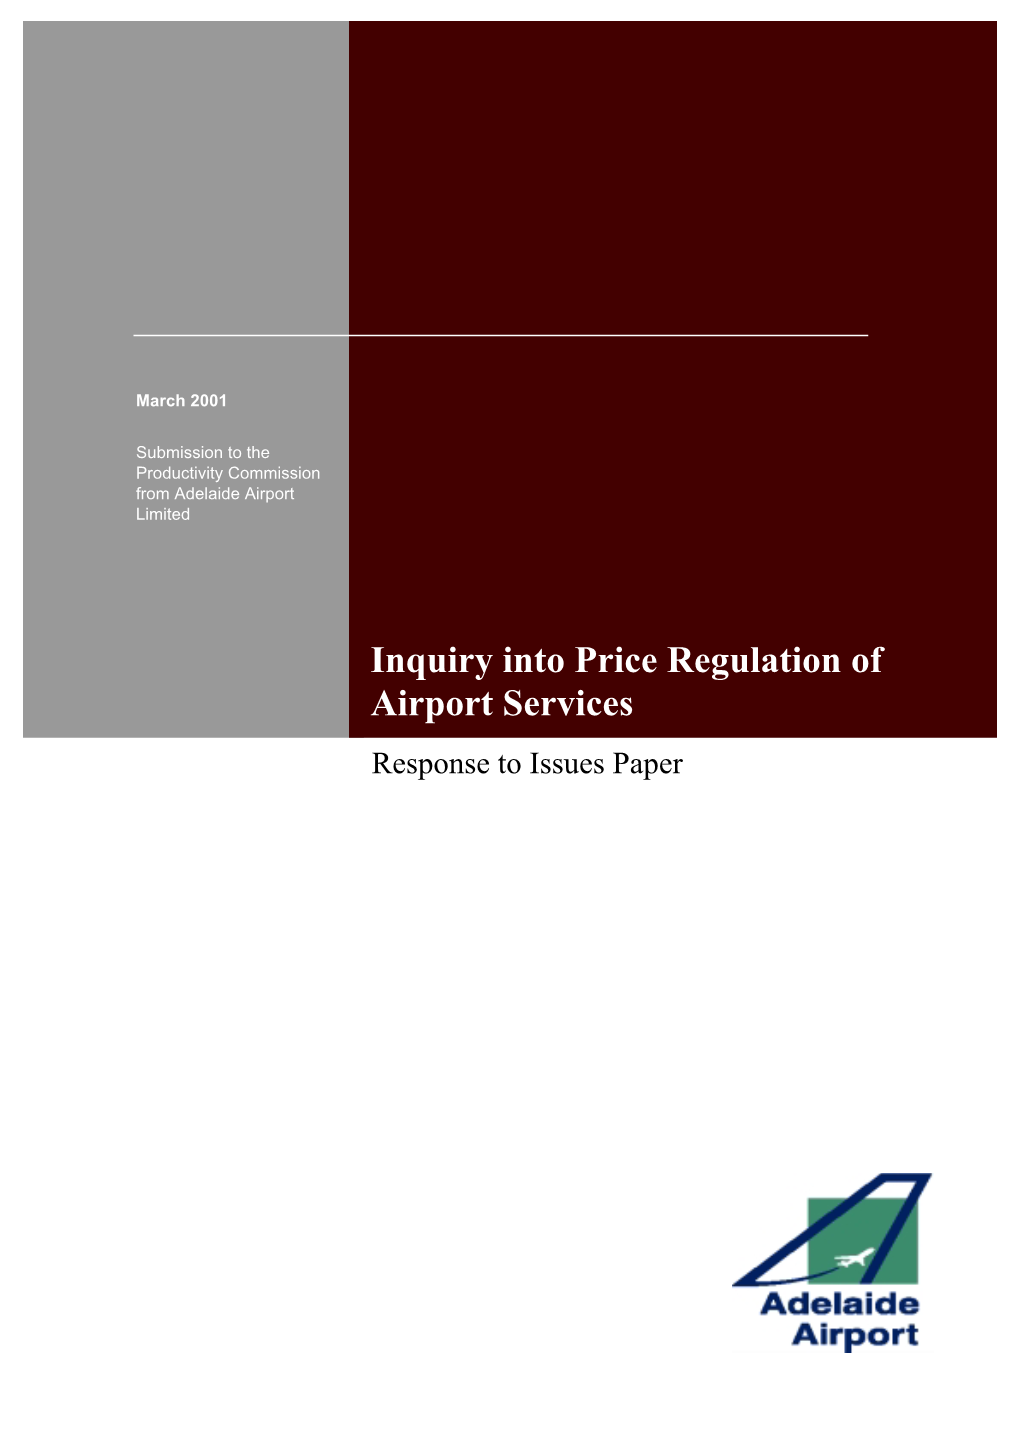 Inquiry Into Price Regulation of Airport Services Response to Issues Paper Table of Contents